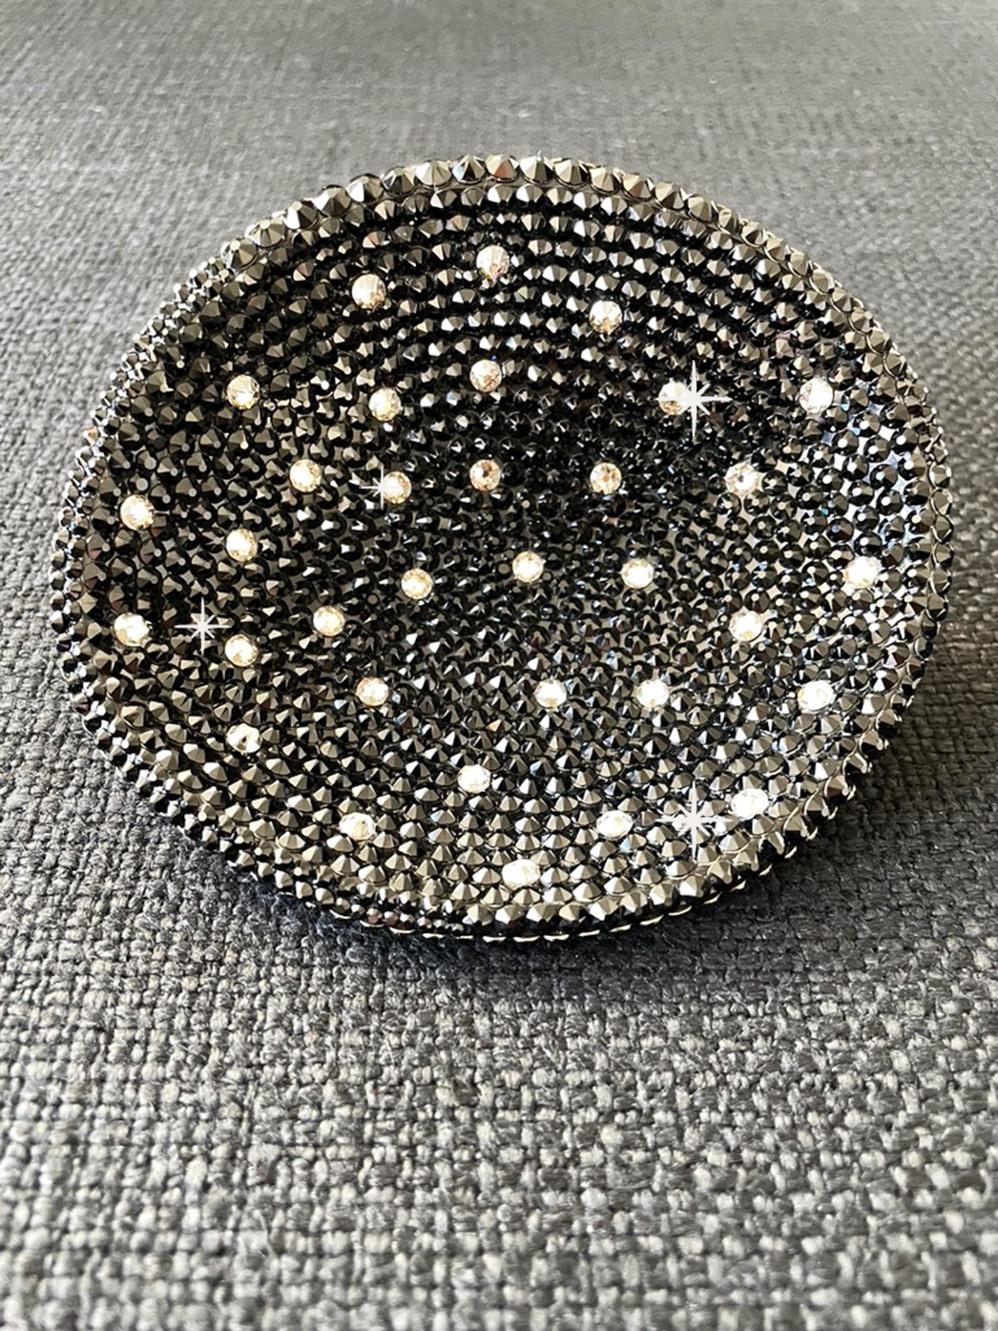 This tray's shape is beautiful the way it moves in an undulating manner is stunning. This too, needed to be rescued and so I up-cycled it. This was going to be part of my Jet + Silver group. My Artisan who does all of my lacquer work was given the